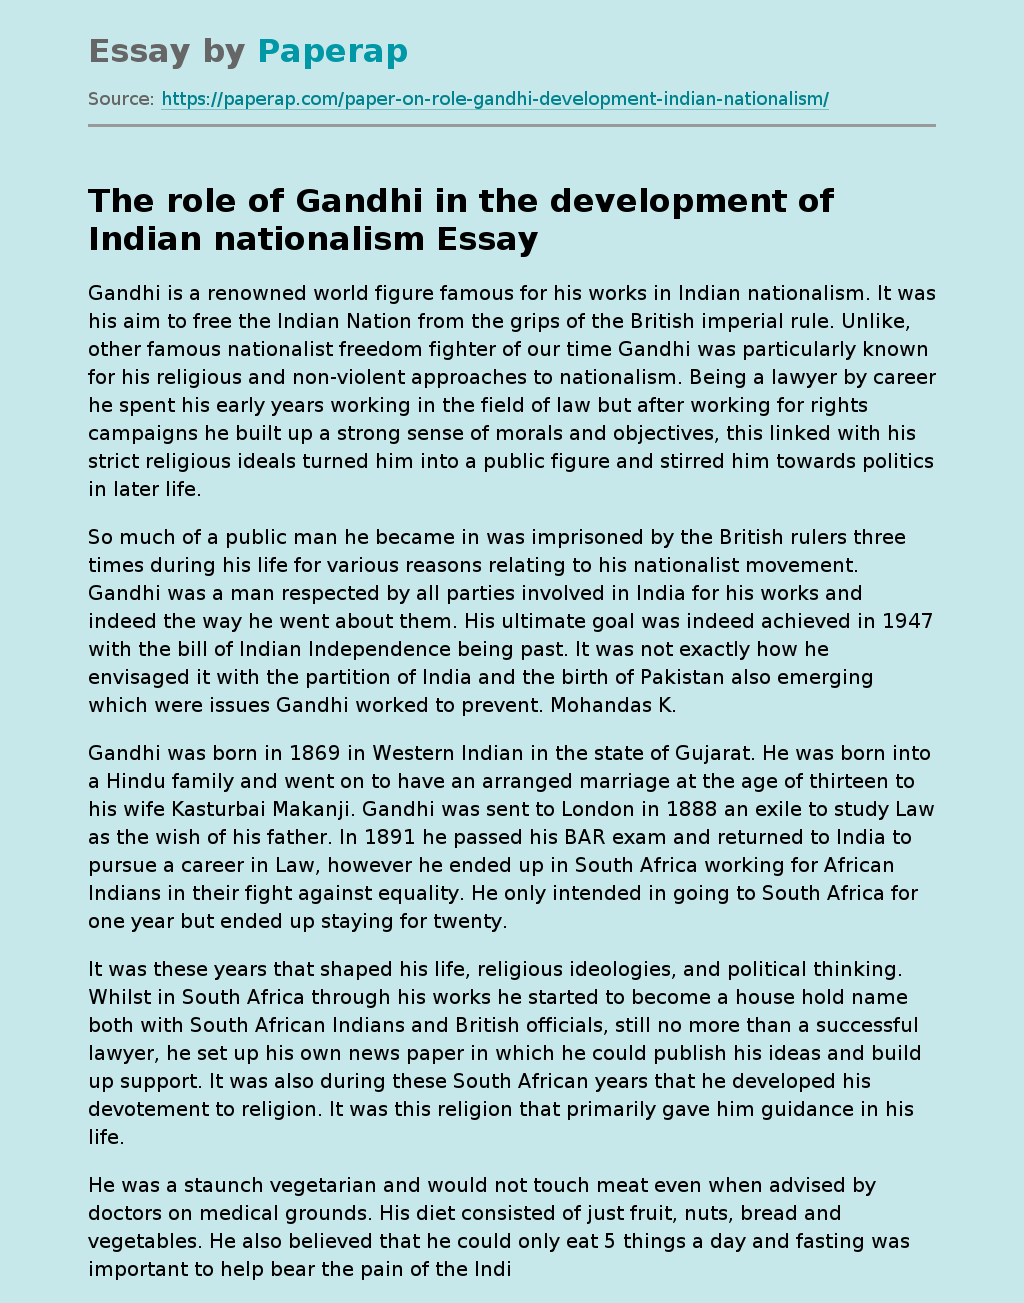 The role of Gandhi in the development of Indian nationalism